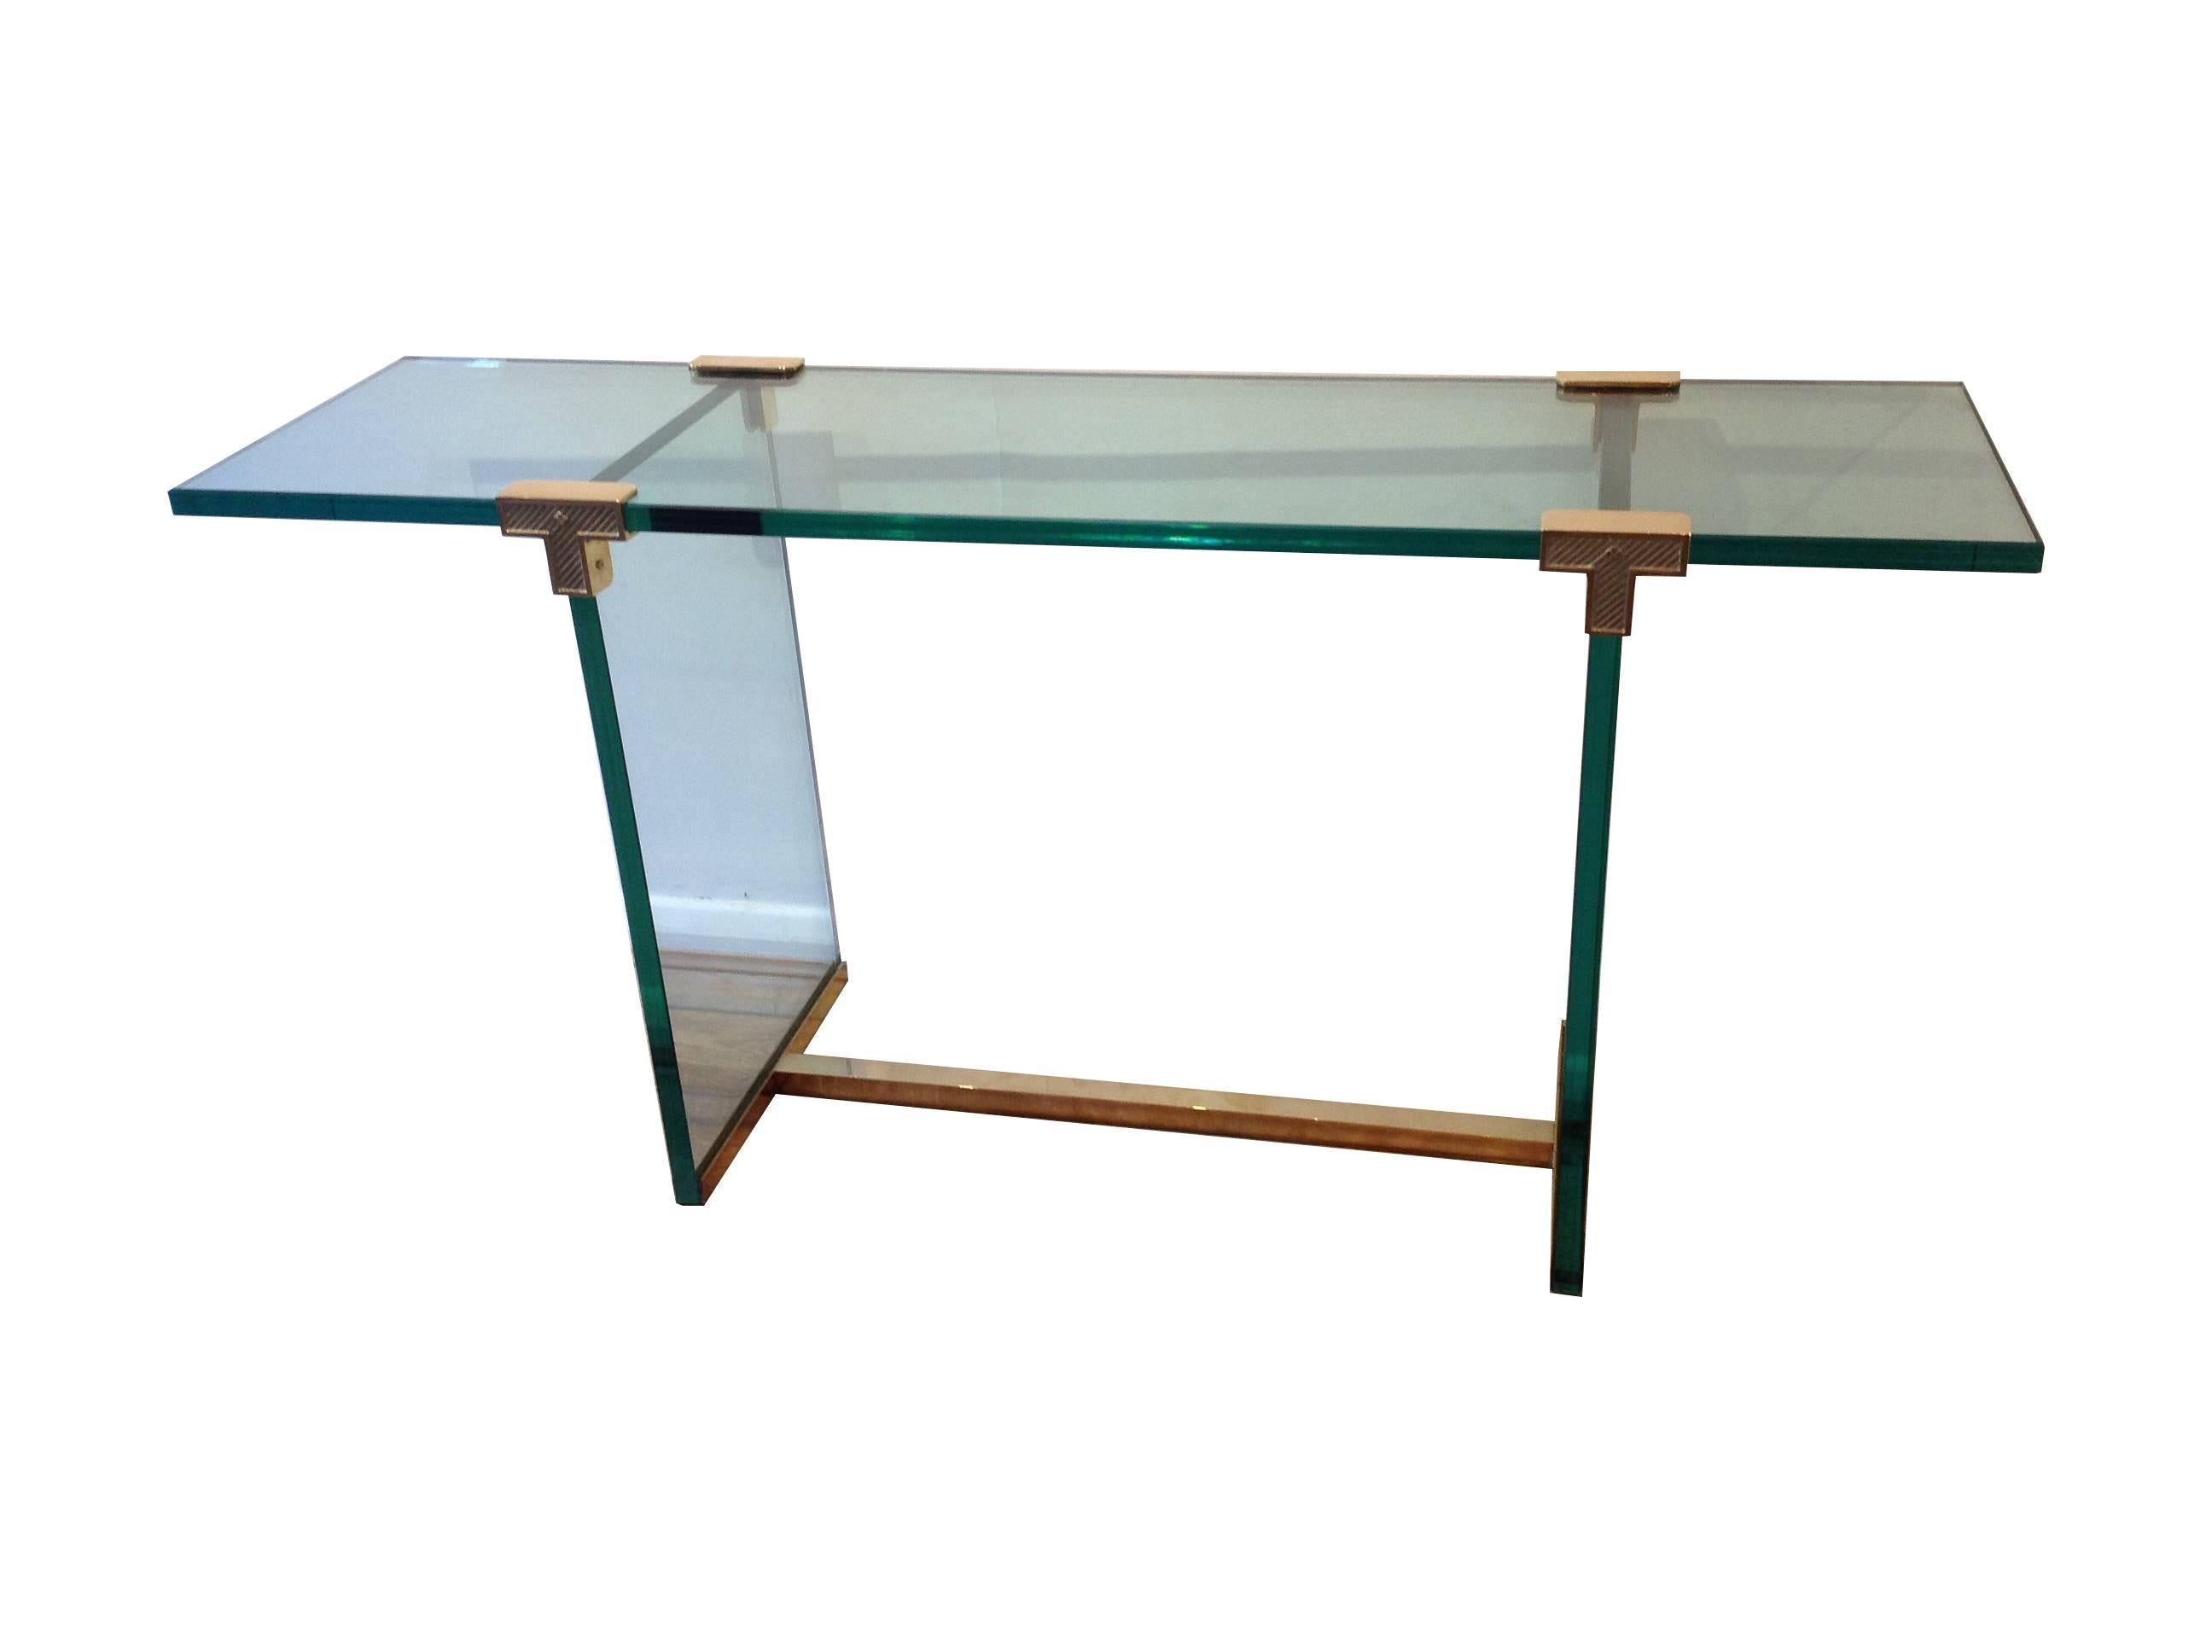 A Peter Ghyczy console with thick 2.4cm glass and sand cast brass fittings and base. Designed by Hungarian architect and designer Peter Ghyczy who moved to Germany to study architecture and later moved to the Netherlands where he produced a large